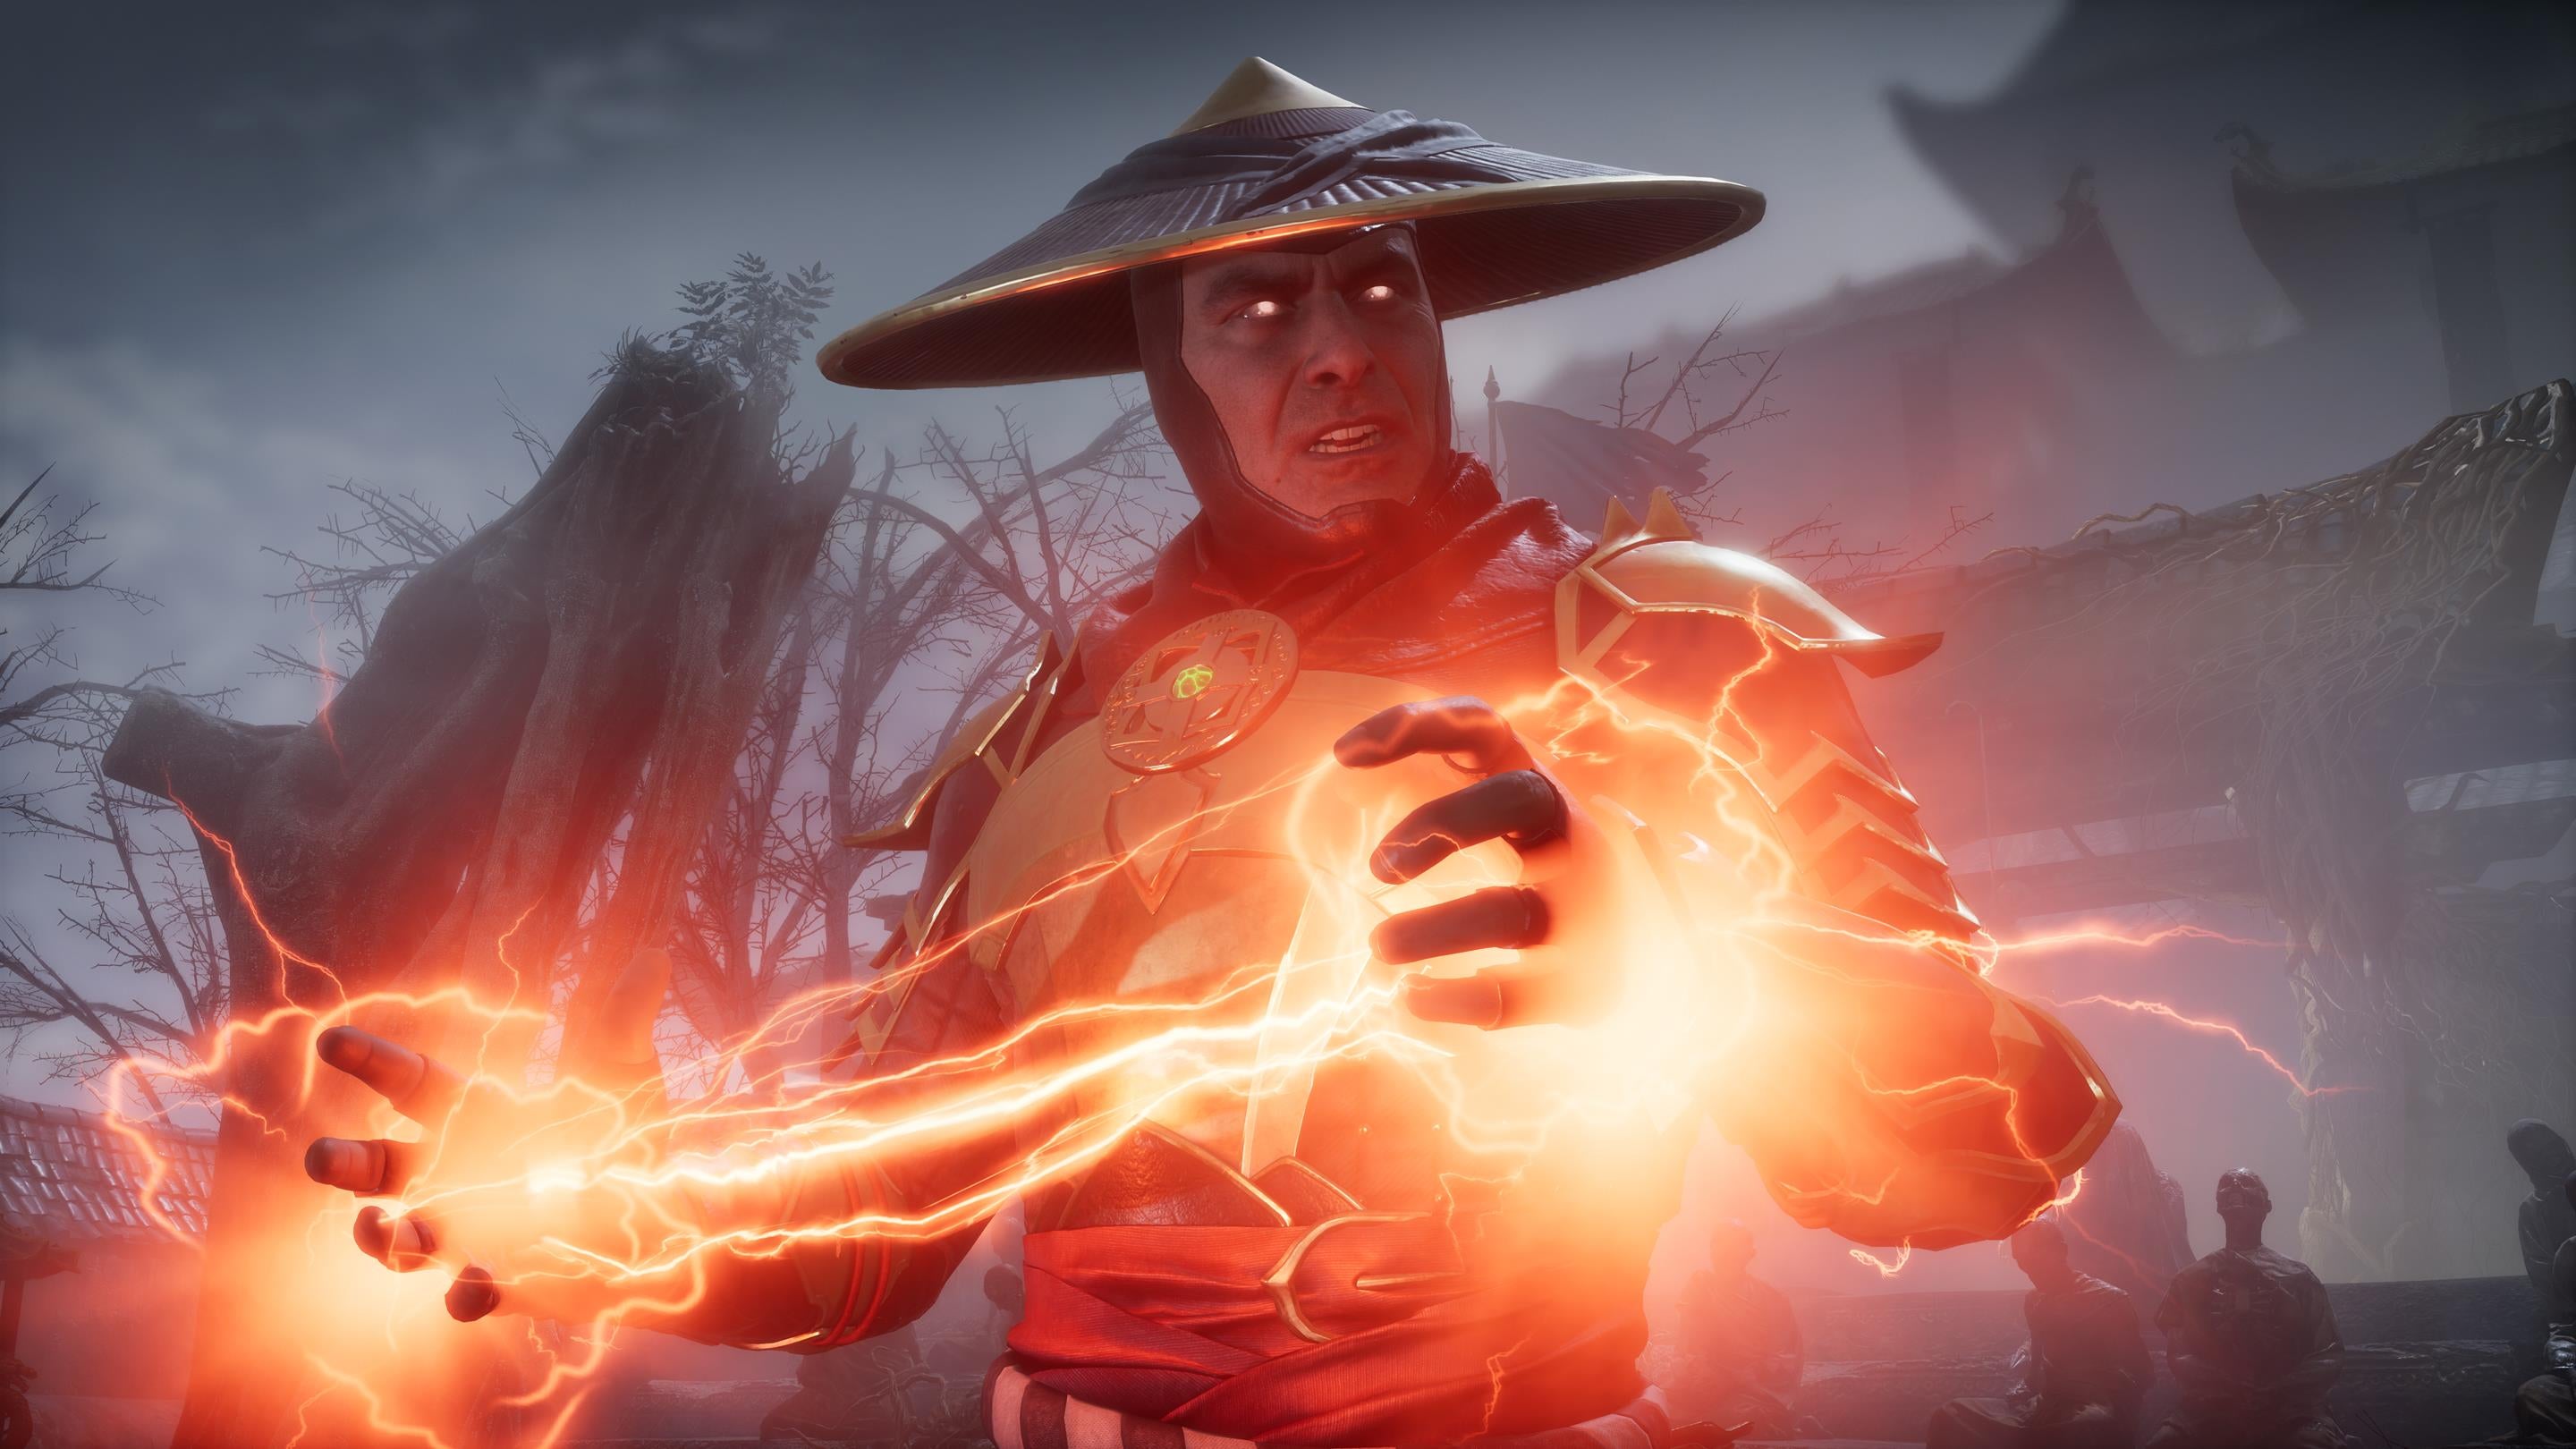 Image for Mortal Kombat 11's next update will gift players free Koins to make up for Tower of Time issues